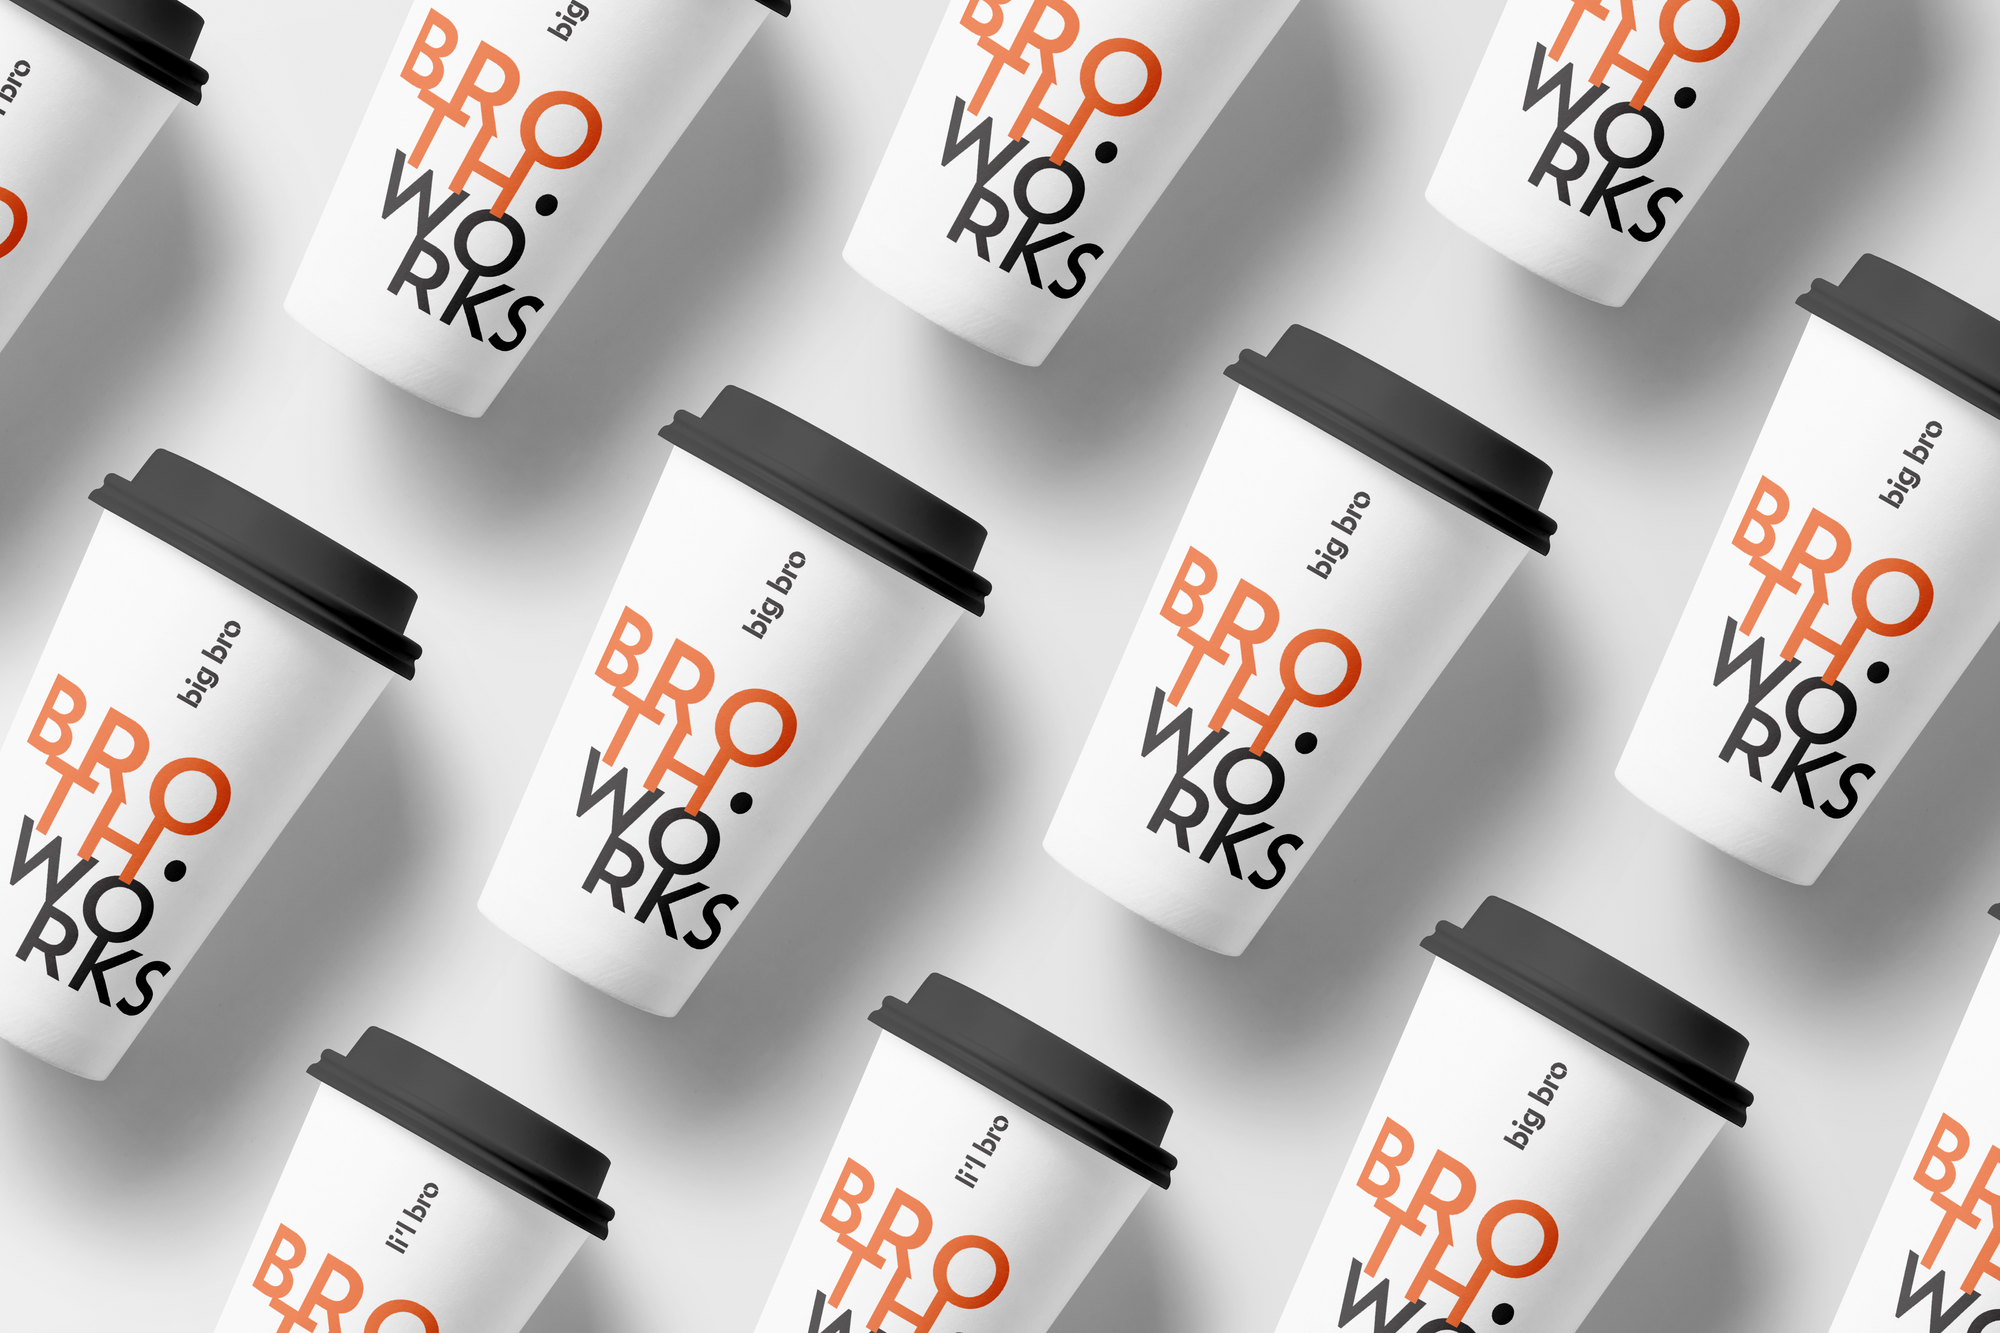 Brothworks Launches Micro-Retail Concept, Redefining Broth Category